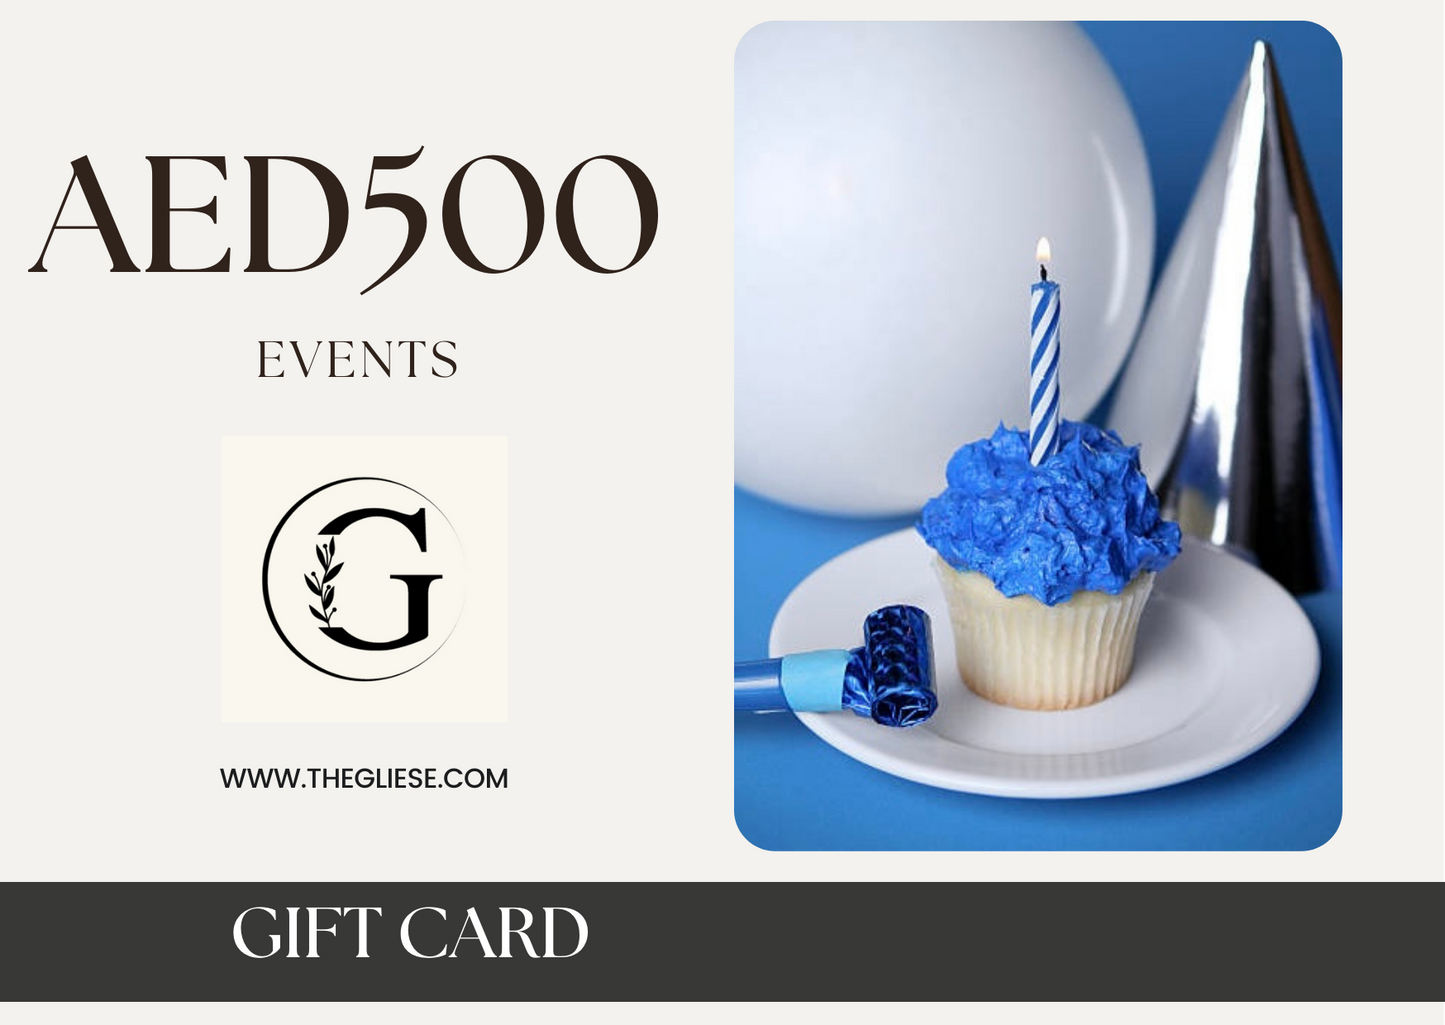 Event GIFT CARD